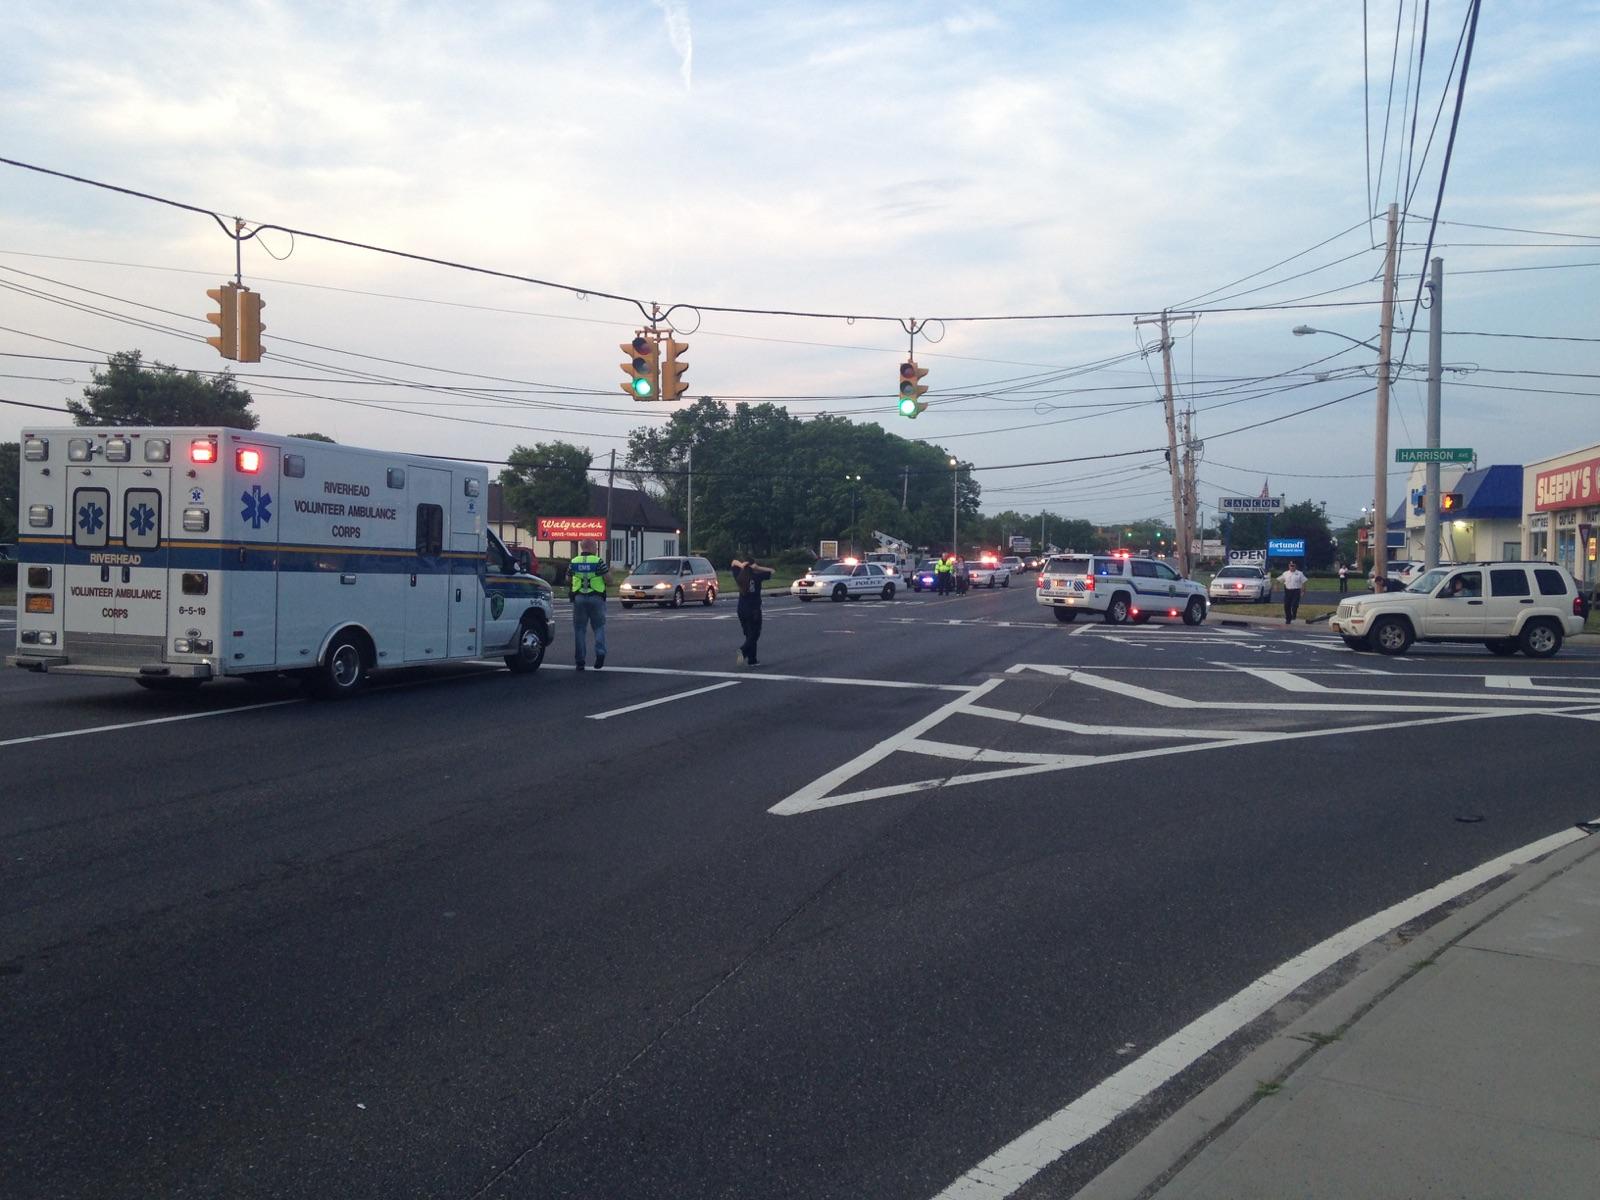 Riverhead police and fire officials at the scene on Route 58 on Monday. (Credit: Nicole Smith)